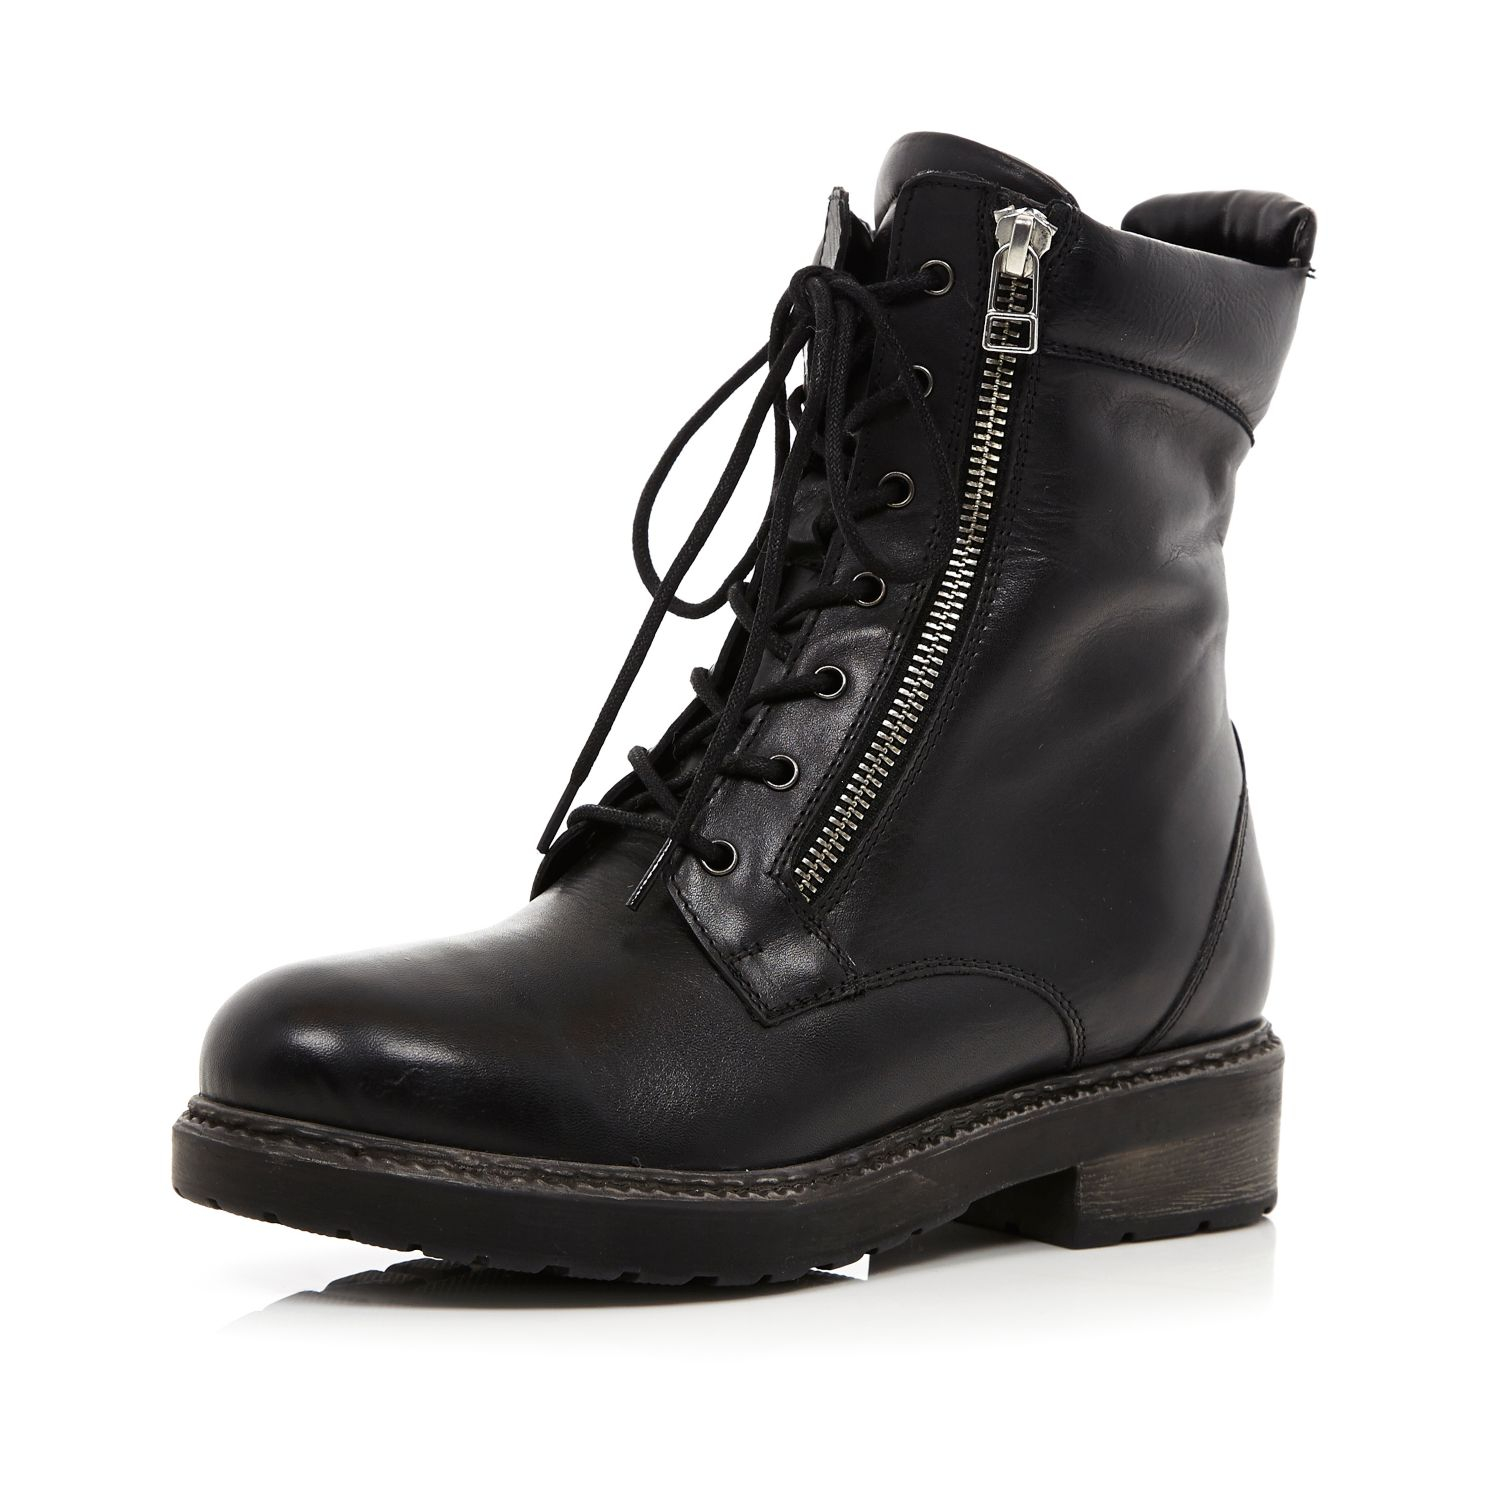 River Island Black Lace Up Biker Boots in Black | Lyst